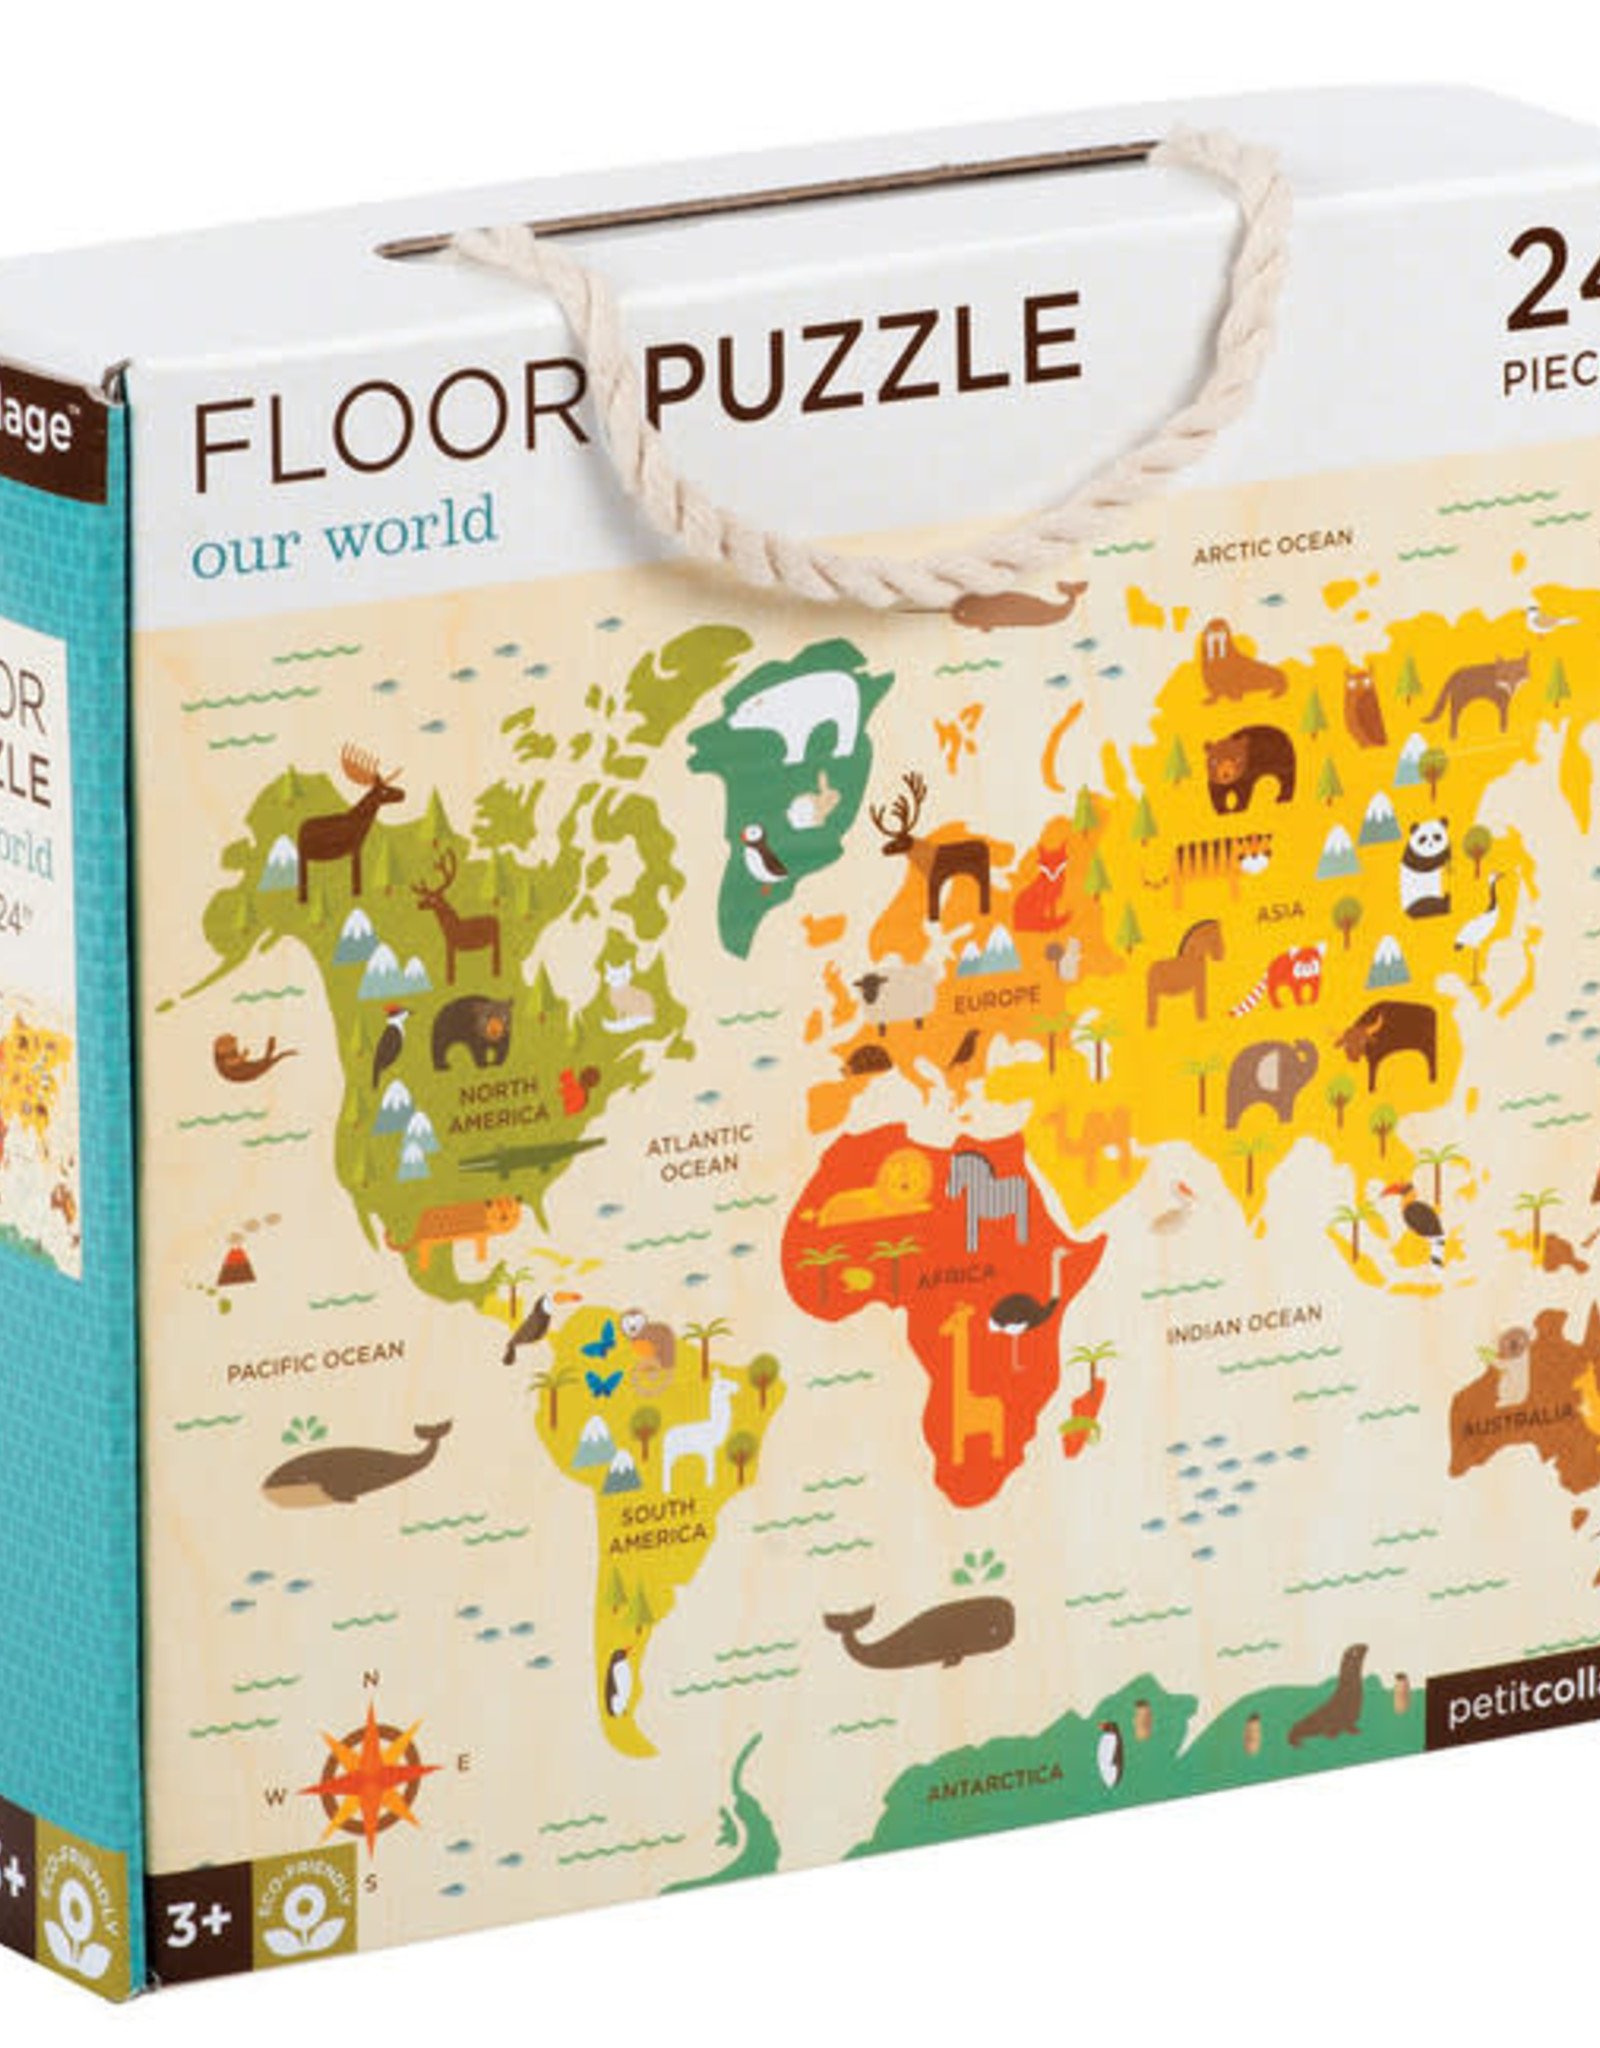 Our World Floor Puzzle 24 piece